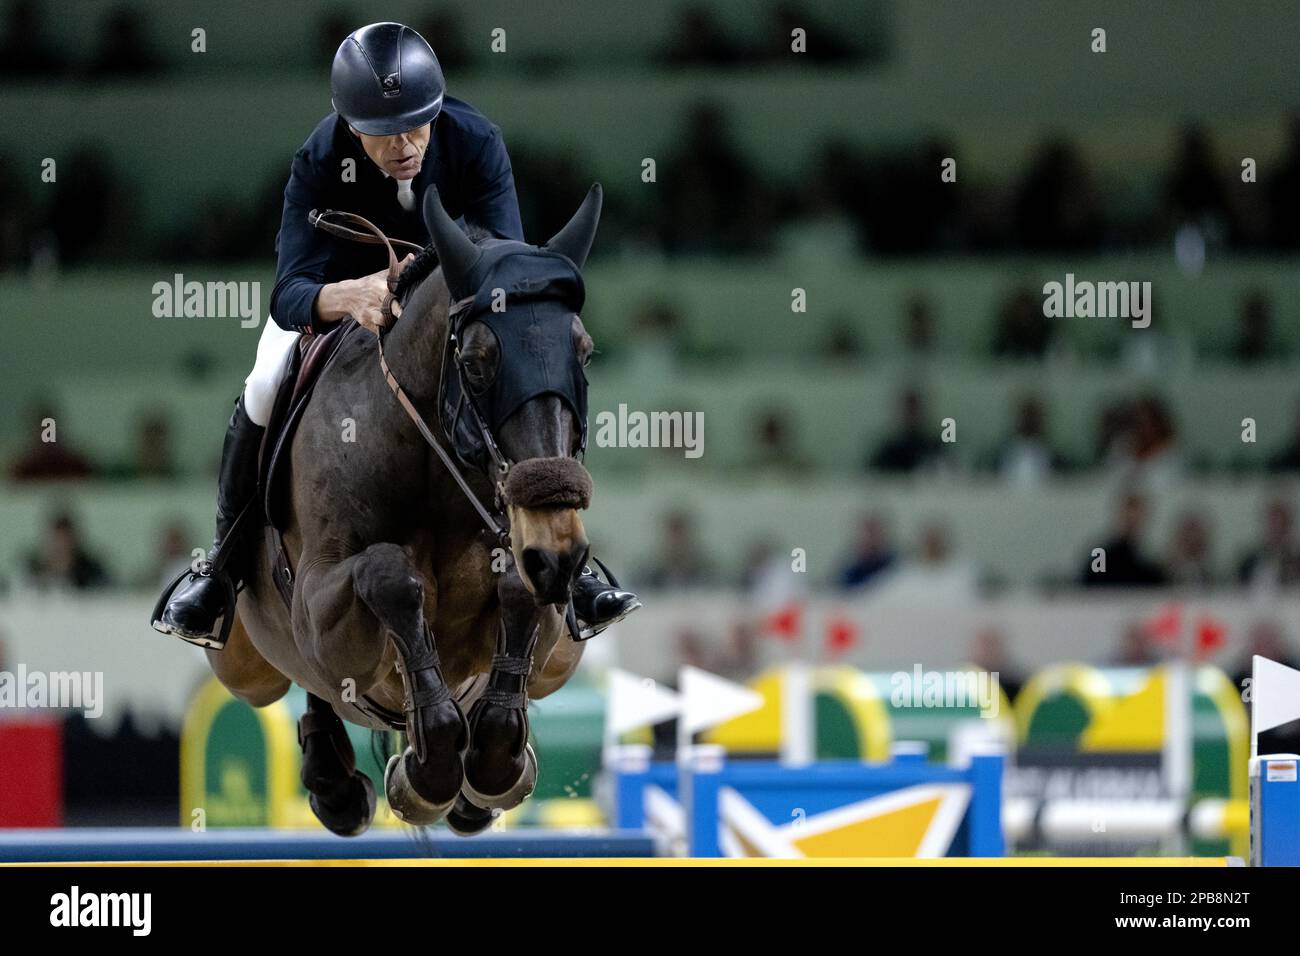 DEN BOSCH - Wilm Vermeir (BEL) on Iq van het Steentje in action during the World Cup show jumping, during The Dutch Masters Indoor Brabant Horse Show. ANP SANDER KONING netherlands out - belgium out Stock Photo